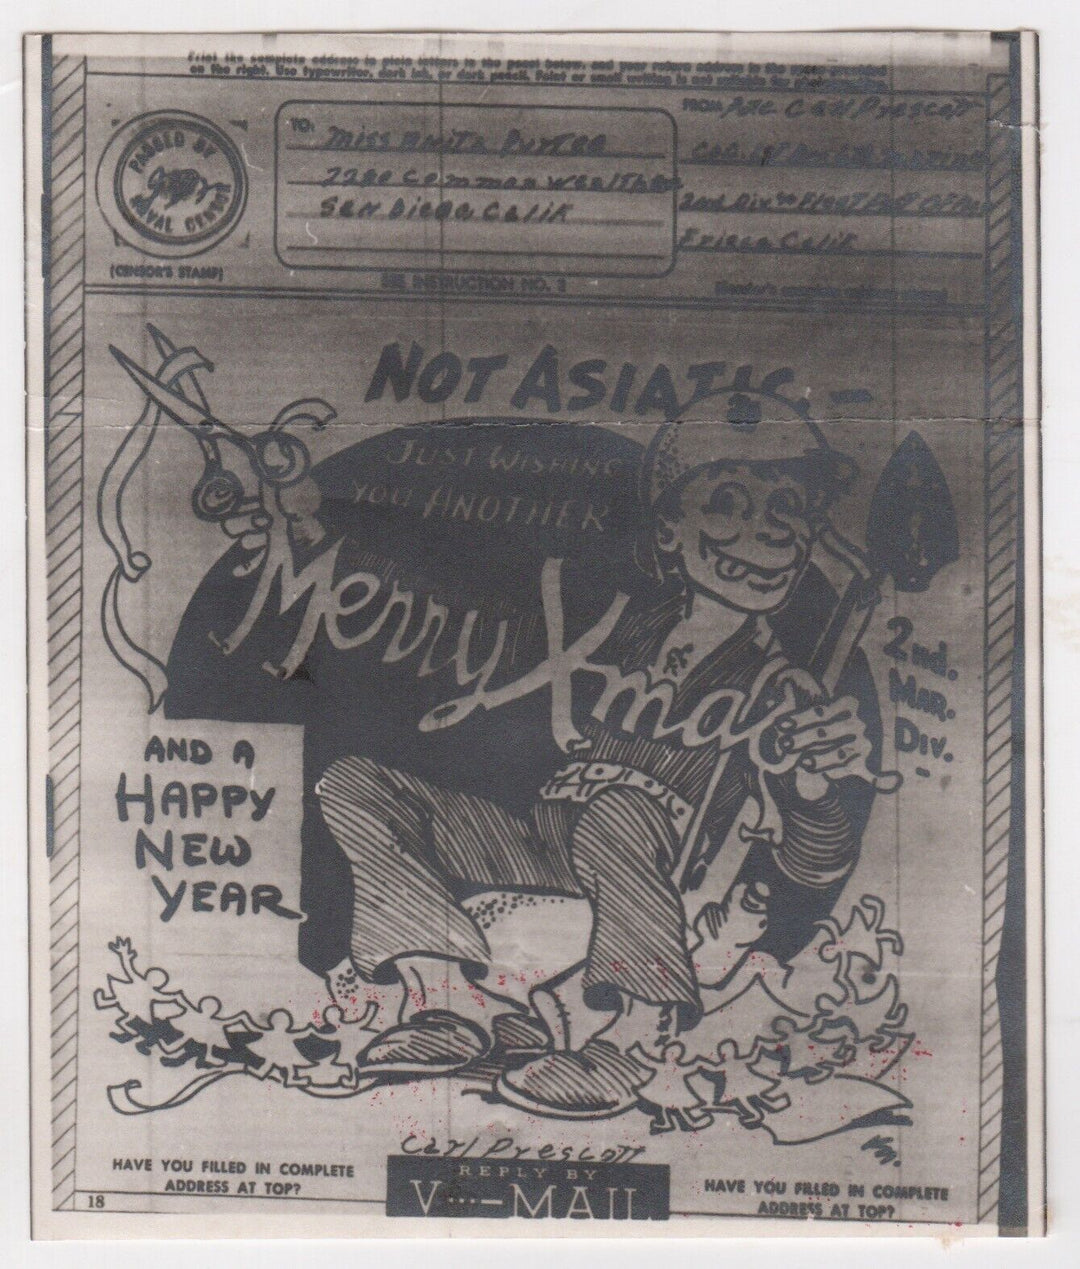 2nd Marine Division Asiatic Merry Christmas Cartoon WWII Art V-Mail Letter